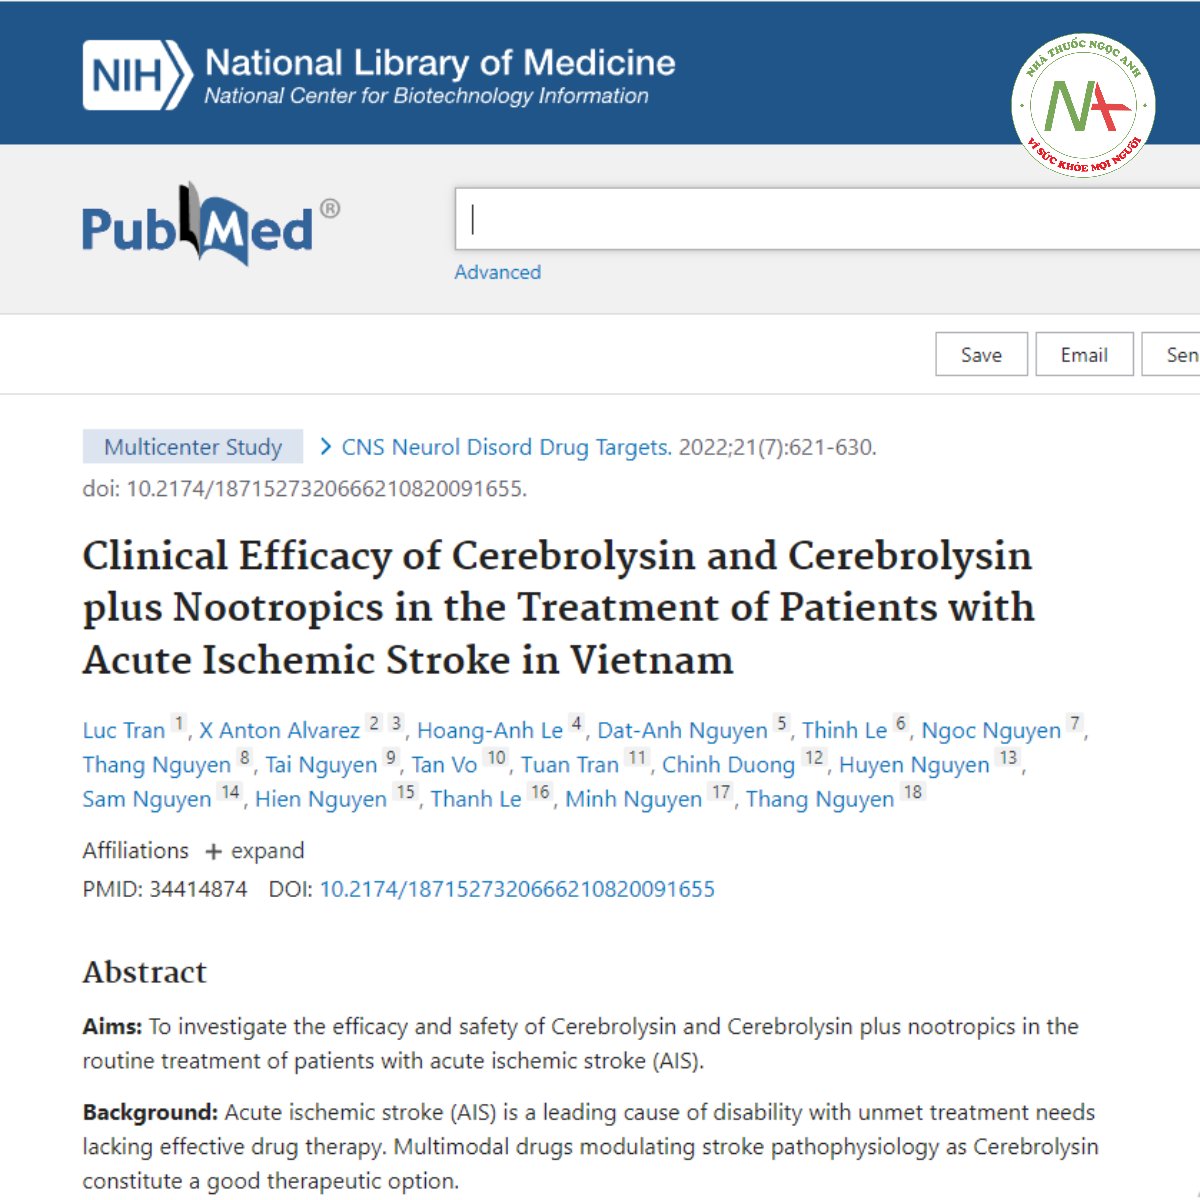 Clinical Efficacy of Cerebrolysin and Cerebrolysin plus Nootropics in the Treatment of Patients with Acute Ischemic Stroke in Vietnam